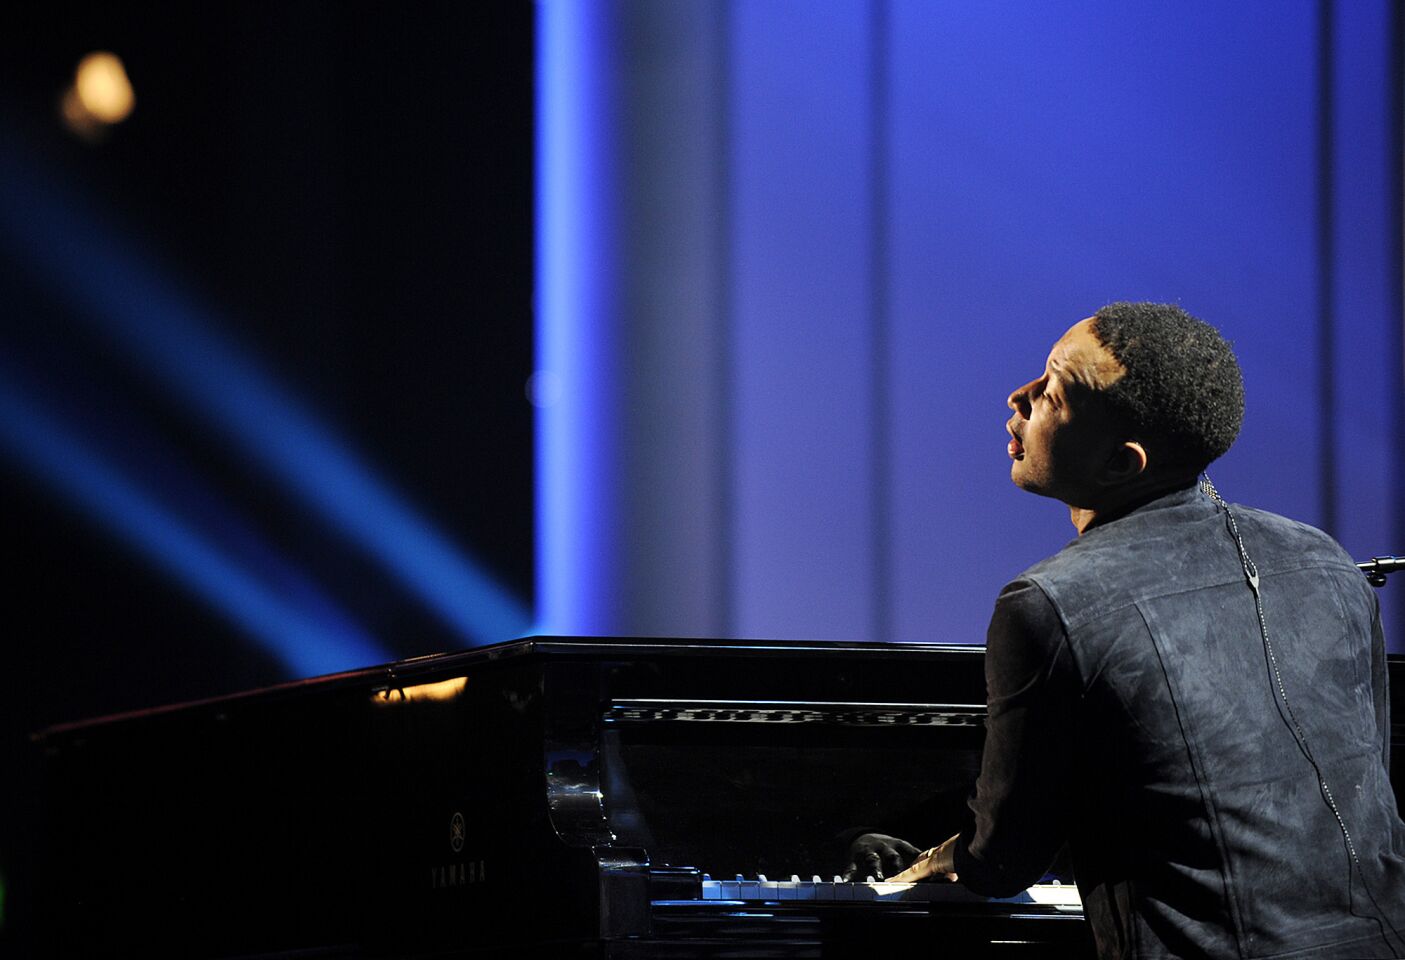 John Legend performs during a rehearsal for "Stevie Wonder: Songs in the Key of Life - An All-Star Tribute" on Feb. 9 at Nokia Theatre in Los Angeles. Read the review